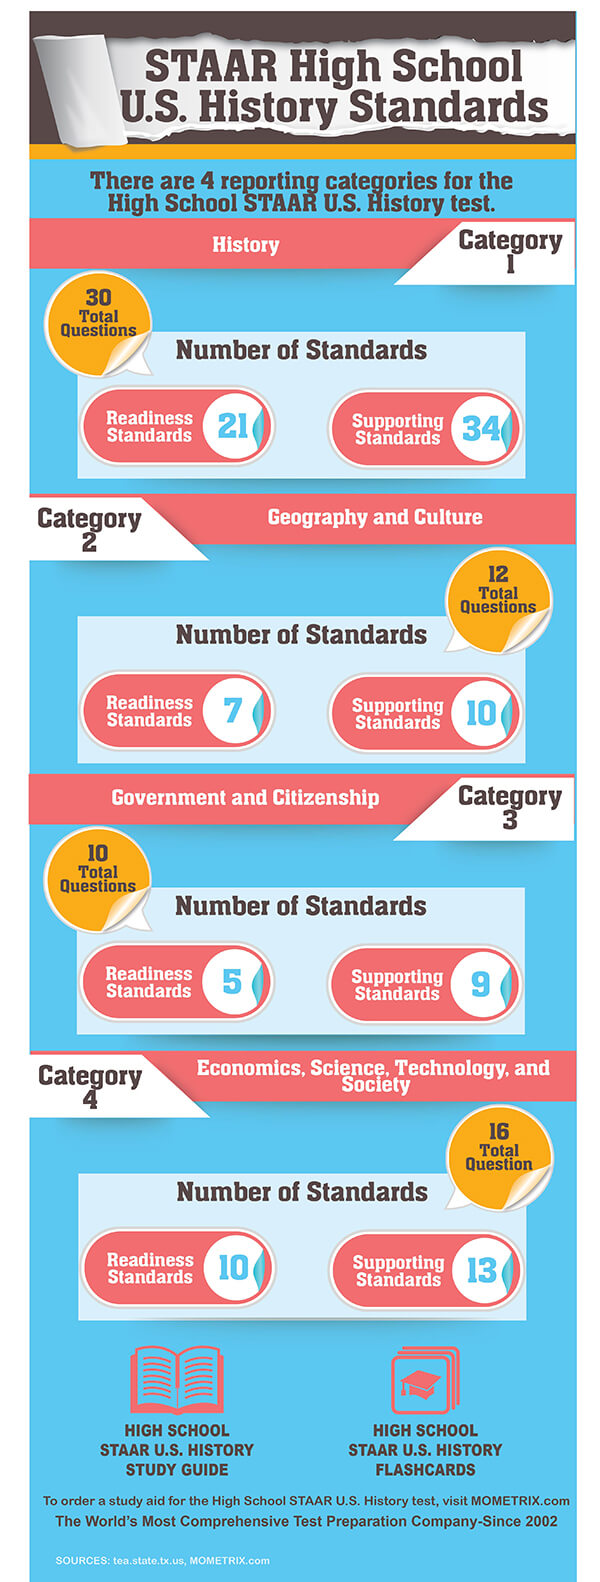 STAAR High School U.S. History Standards. There are 4 reporting categories for the High School STAAR U.S. History Test: History-30 questions; Geography and Culture-12 questions, Government and Citizenship-10 questions; Economics, Science, Technology, and Society-16 questions.